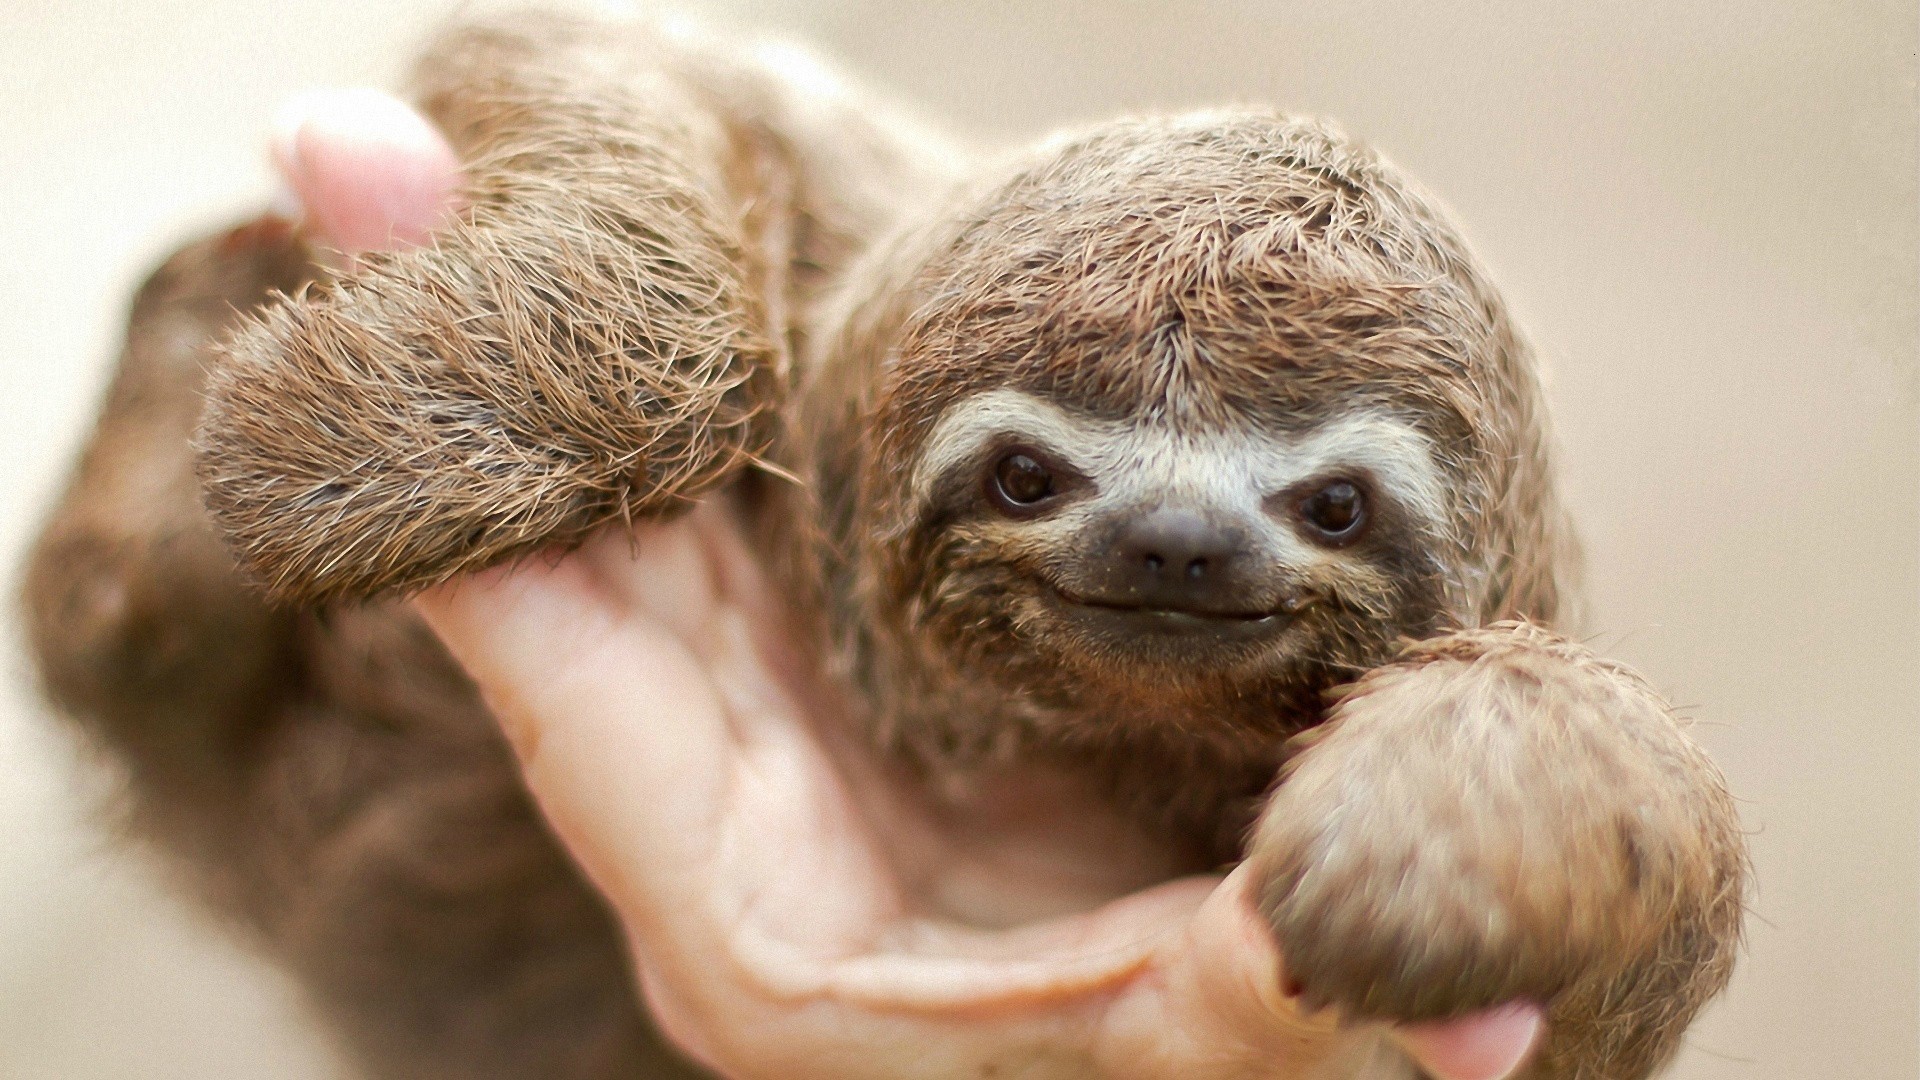 1920x1080 Sloths images Baby sloth HD wallpaper and background photos